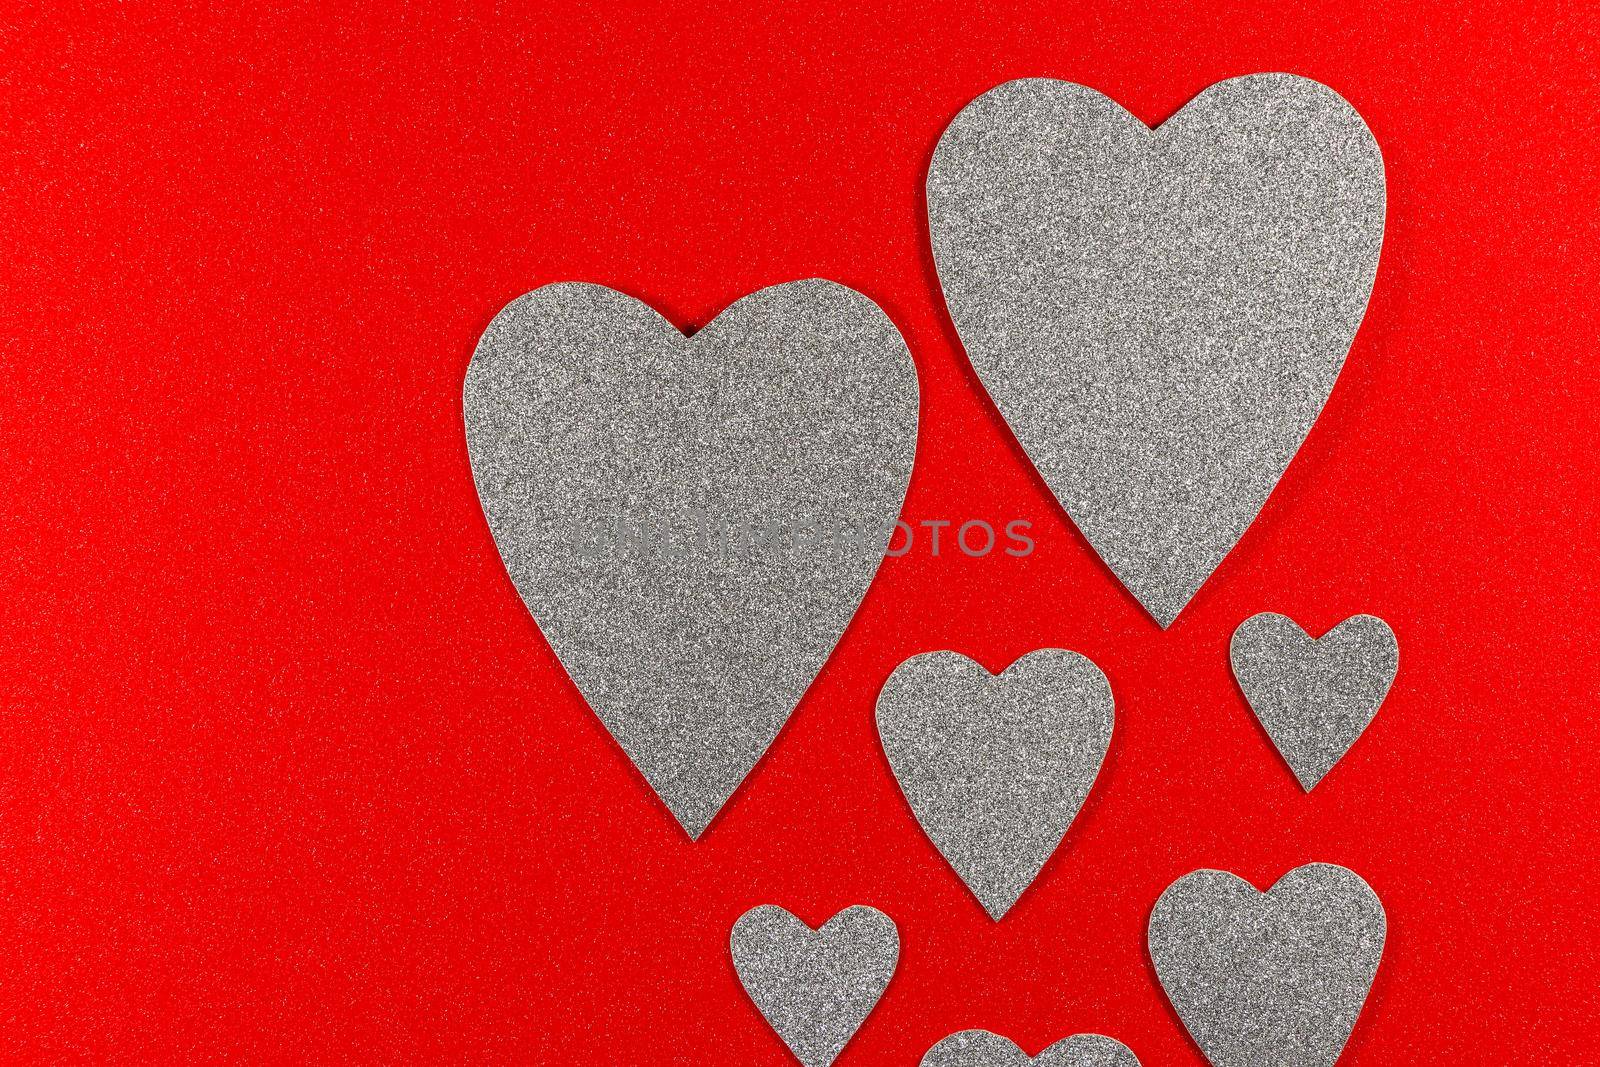 Silver Hearts Rising On Red Textured Background by jjvanginkel